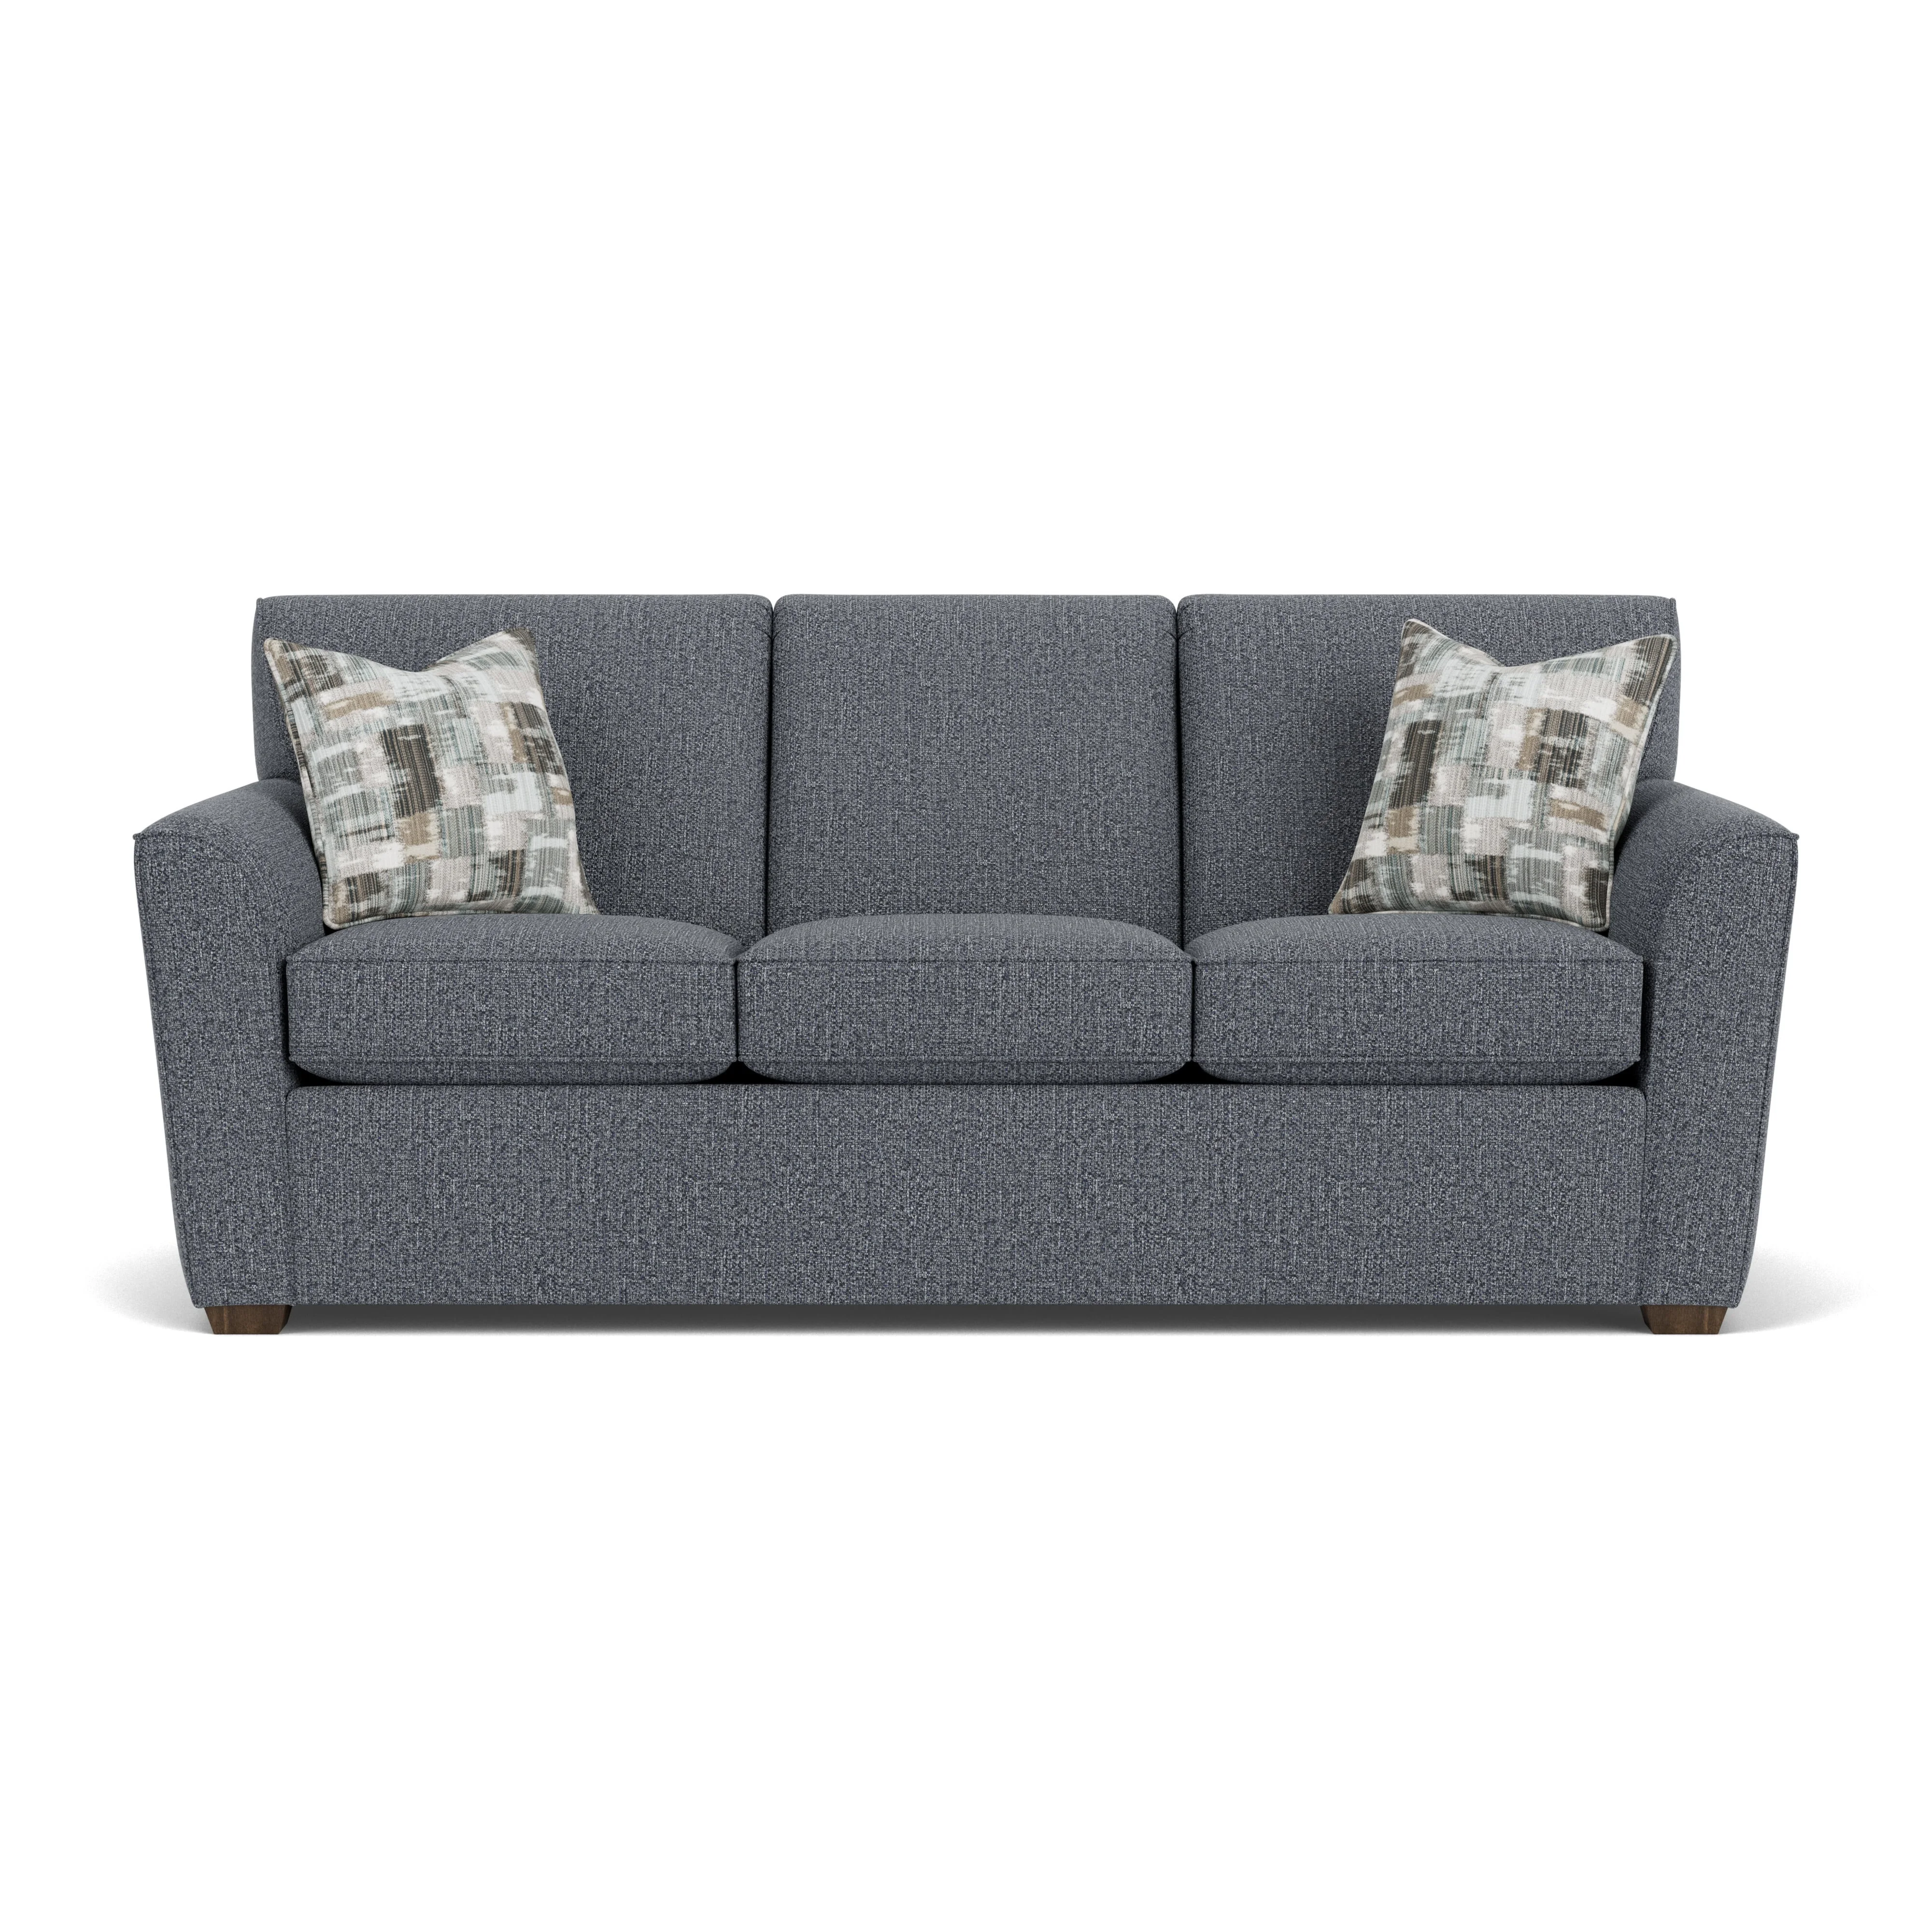 Flexsteel Lakewood 1394657 Casual Queen Sleeper Sofa with Flair Tapered ...